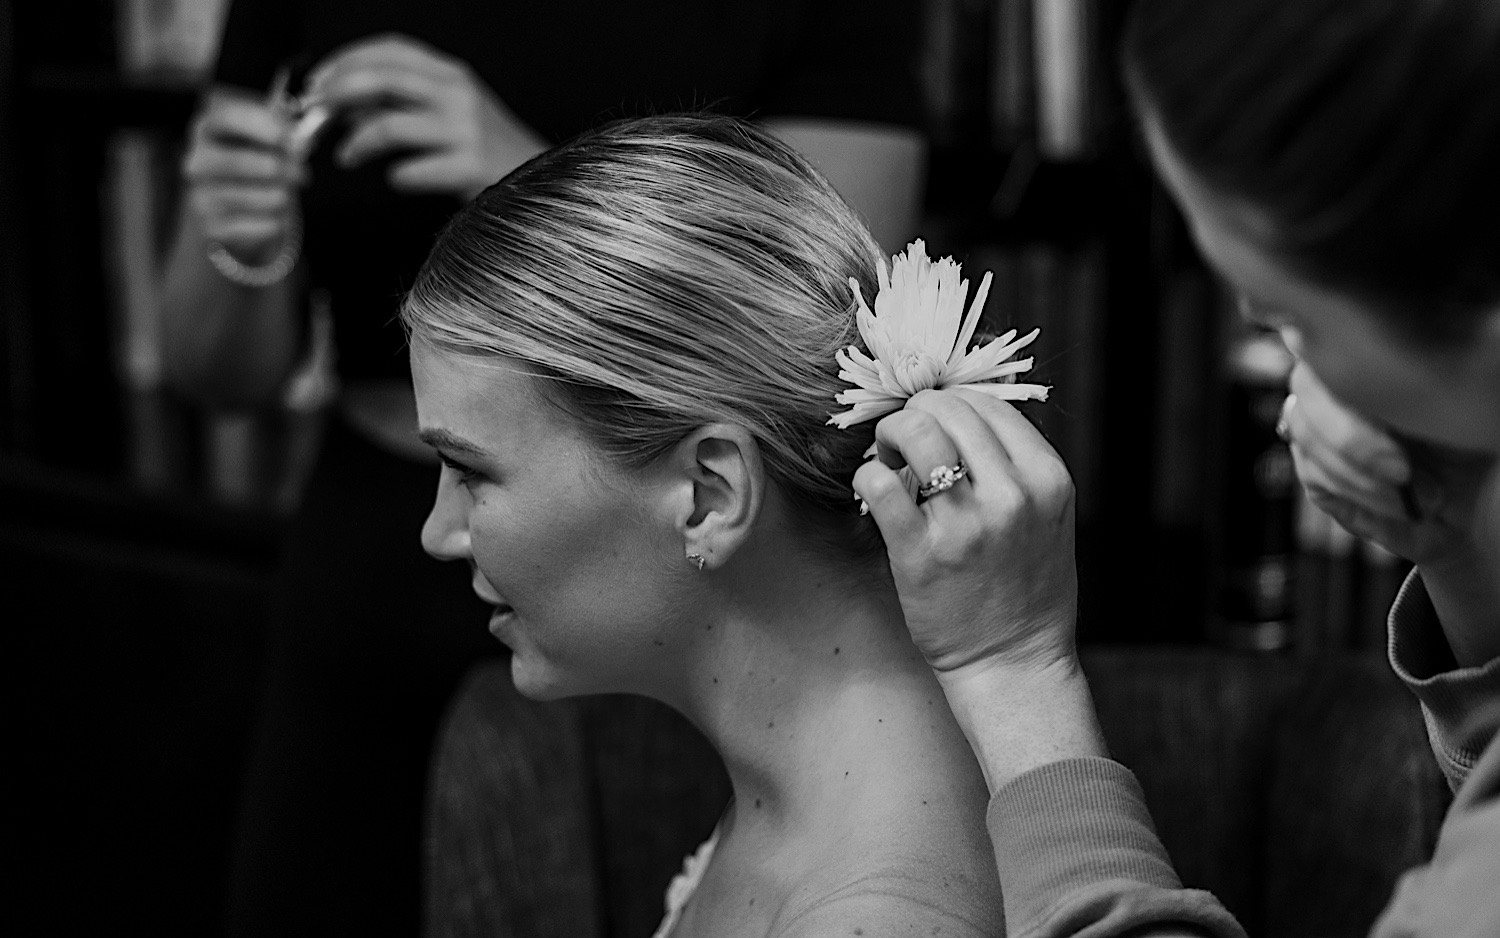 Black and white photo of a bride having a flower put into her hair as she gets ready for her wedding